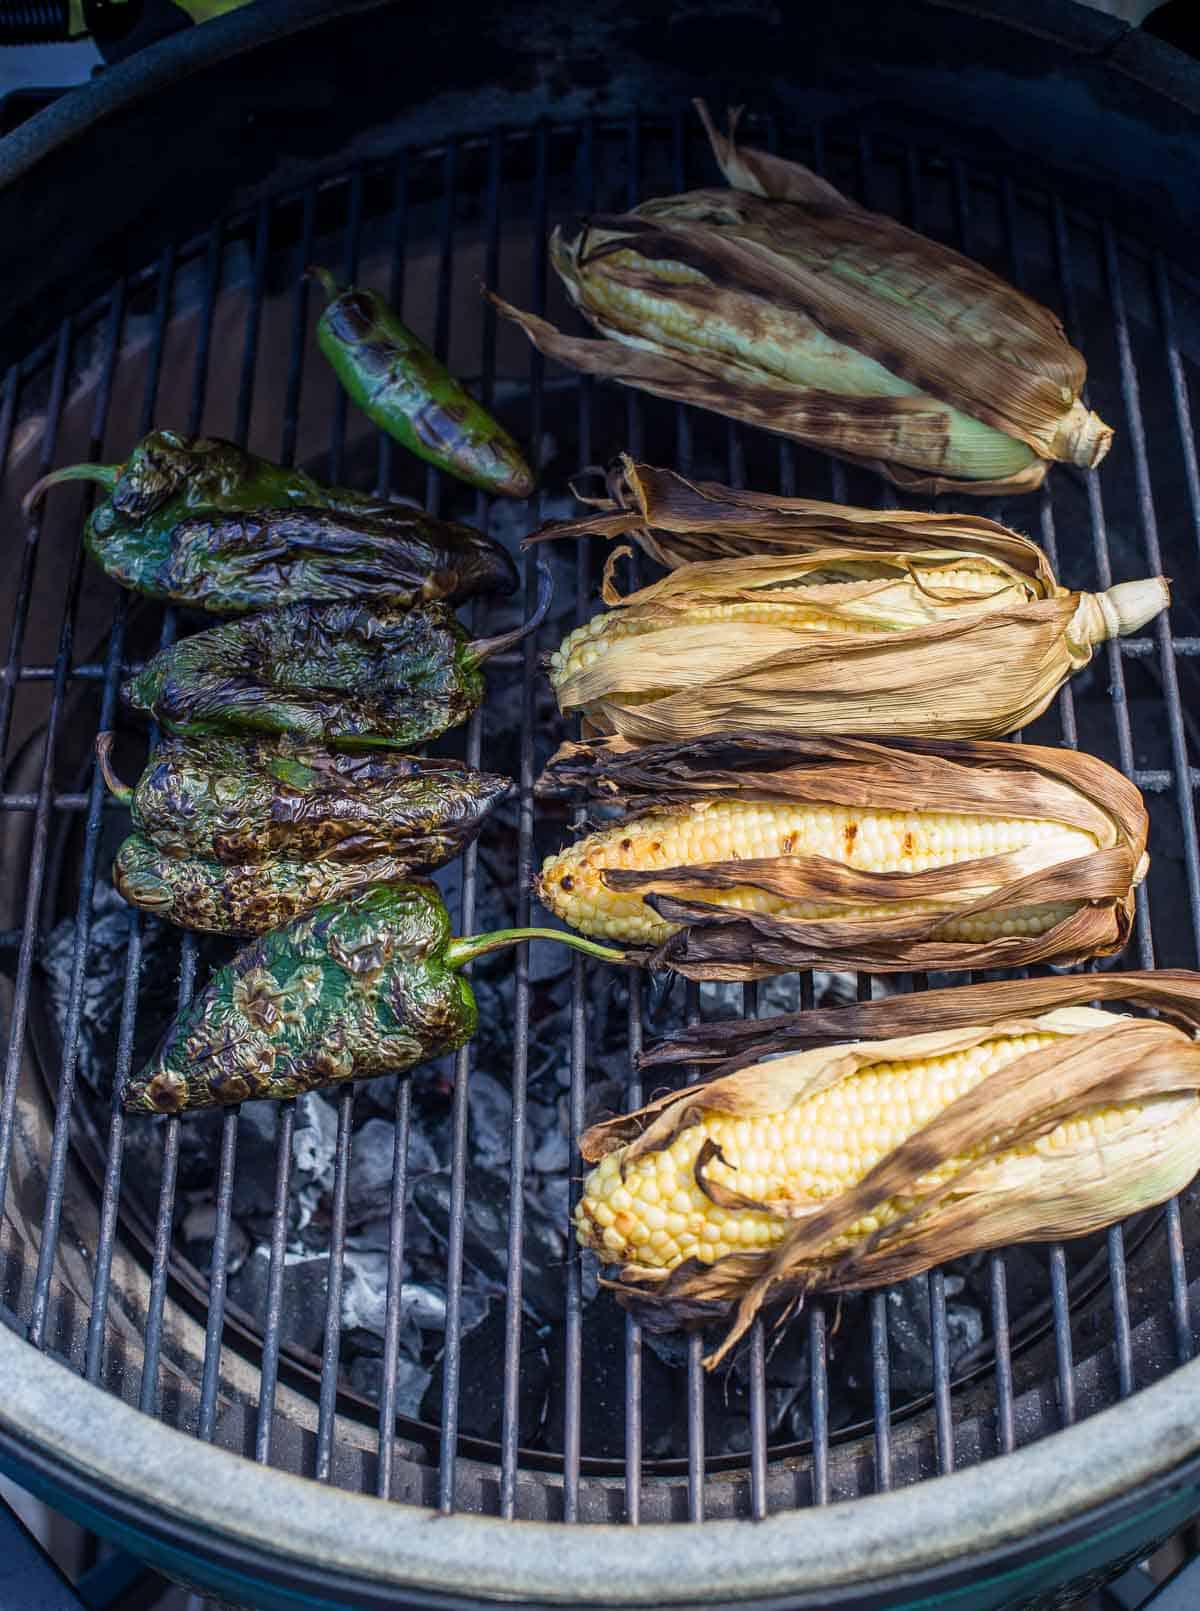 corn and poblano peppers cooking on the grill